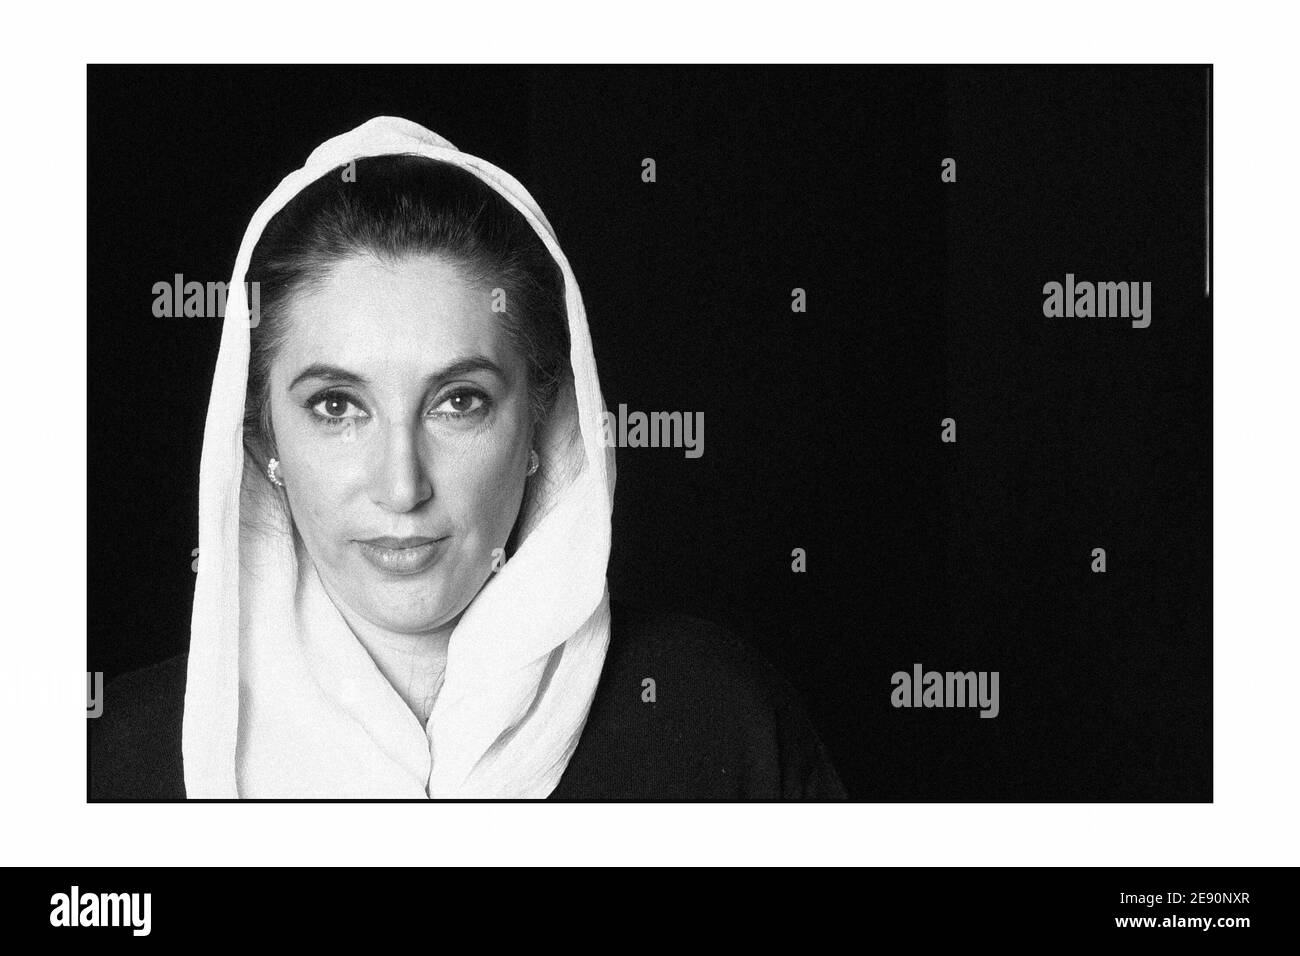 Former Pakistan's Prime Minister Benazir Bhutto, in a photo dated March 2000, in Paris, France. Benazir Bhutto was killed in Rawalpindi, Pakistan on December 27, 2007. Photo by Ammar Abd Rabbo/ABACAPRESS.COM Stock Photo